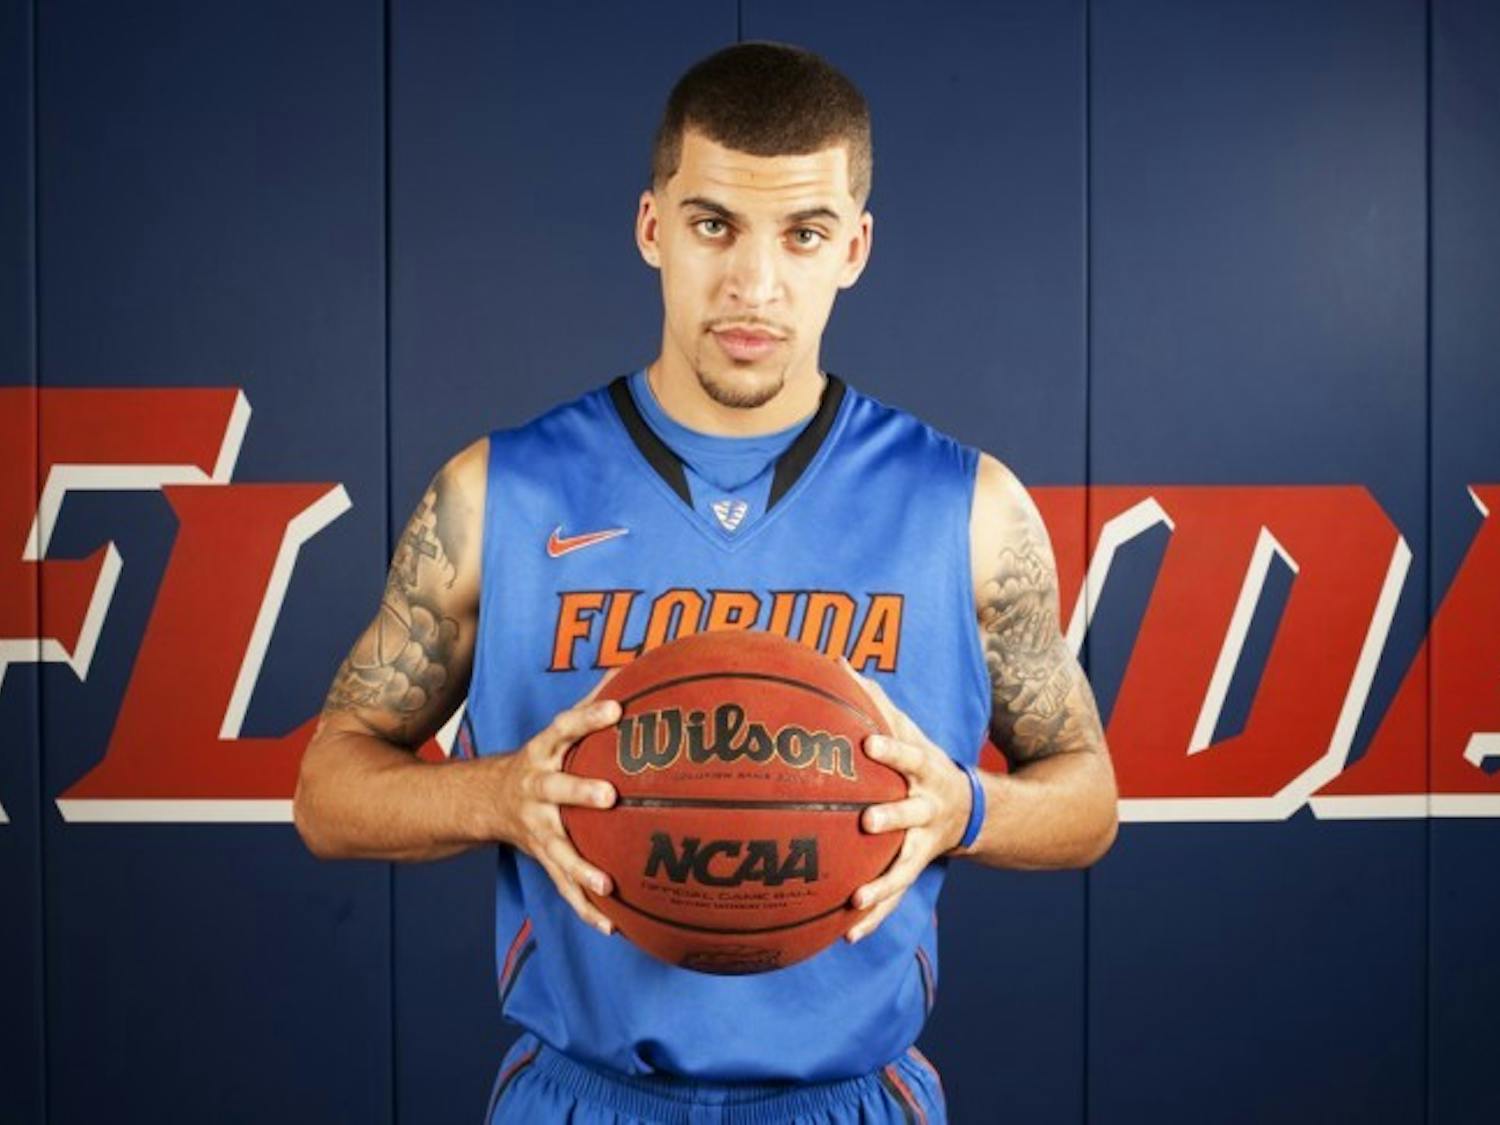 Scottie Wilbekin poses for a photo at the University of Florida Media Day on Oct. 10. Wilbekin scored a career high 17 points in Florida's 79-66 victory against Central Florida on Saturday night in the Stephen C. O'Connell Center.